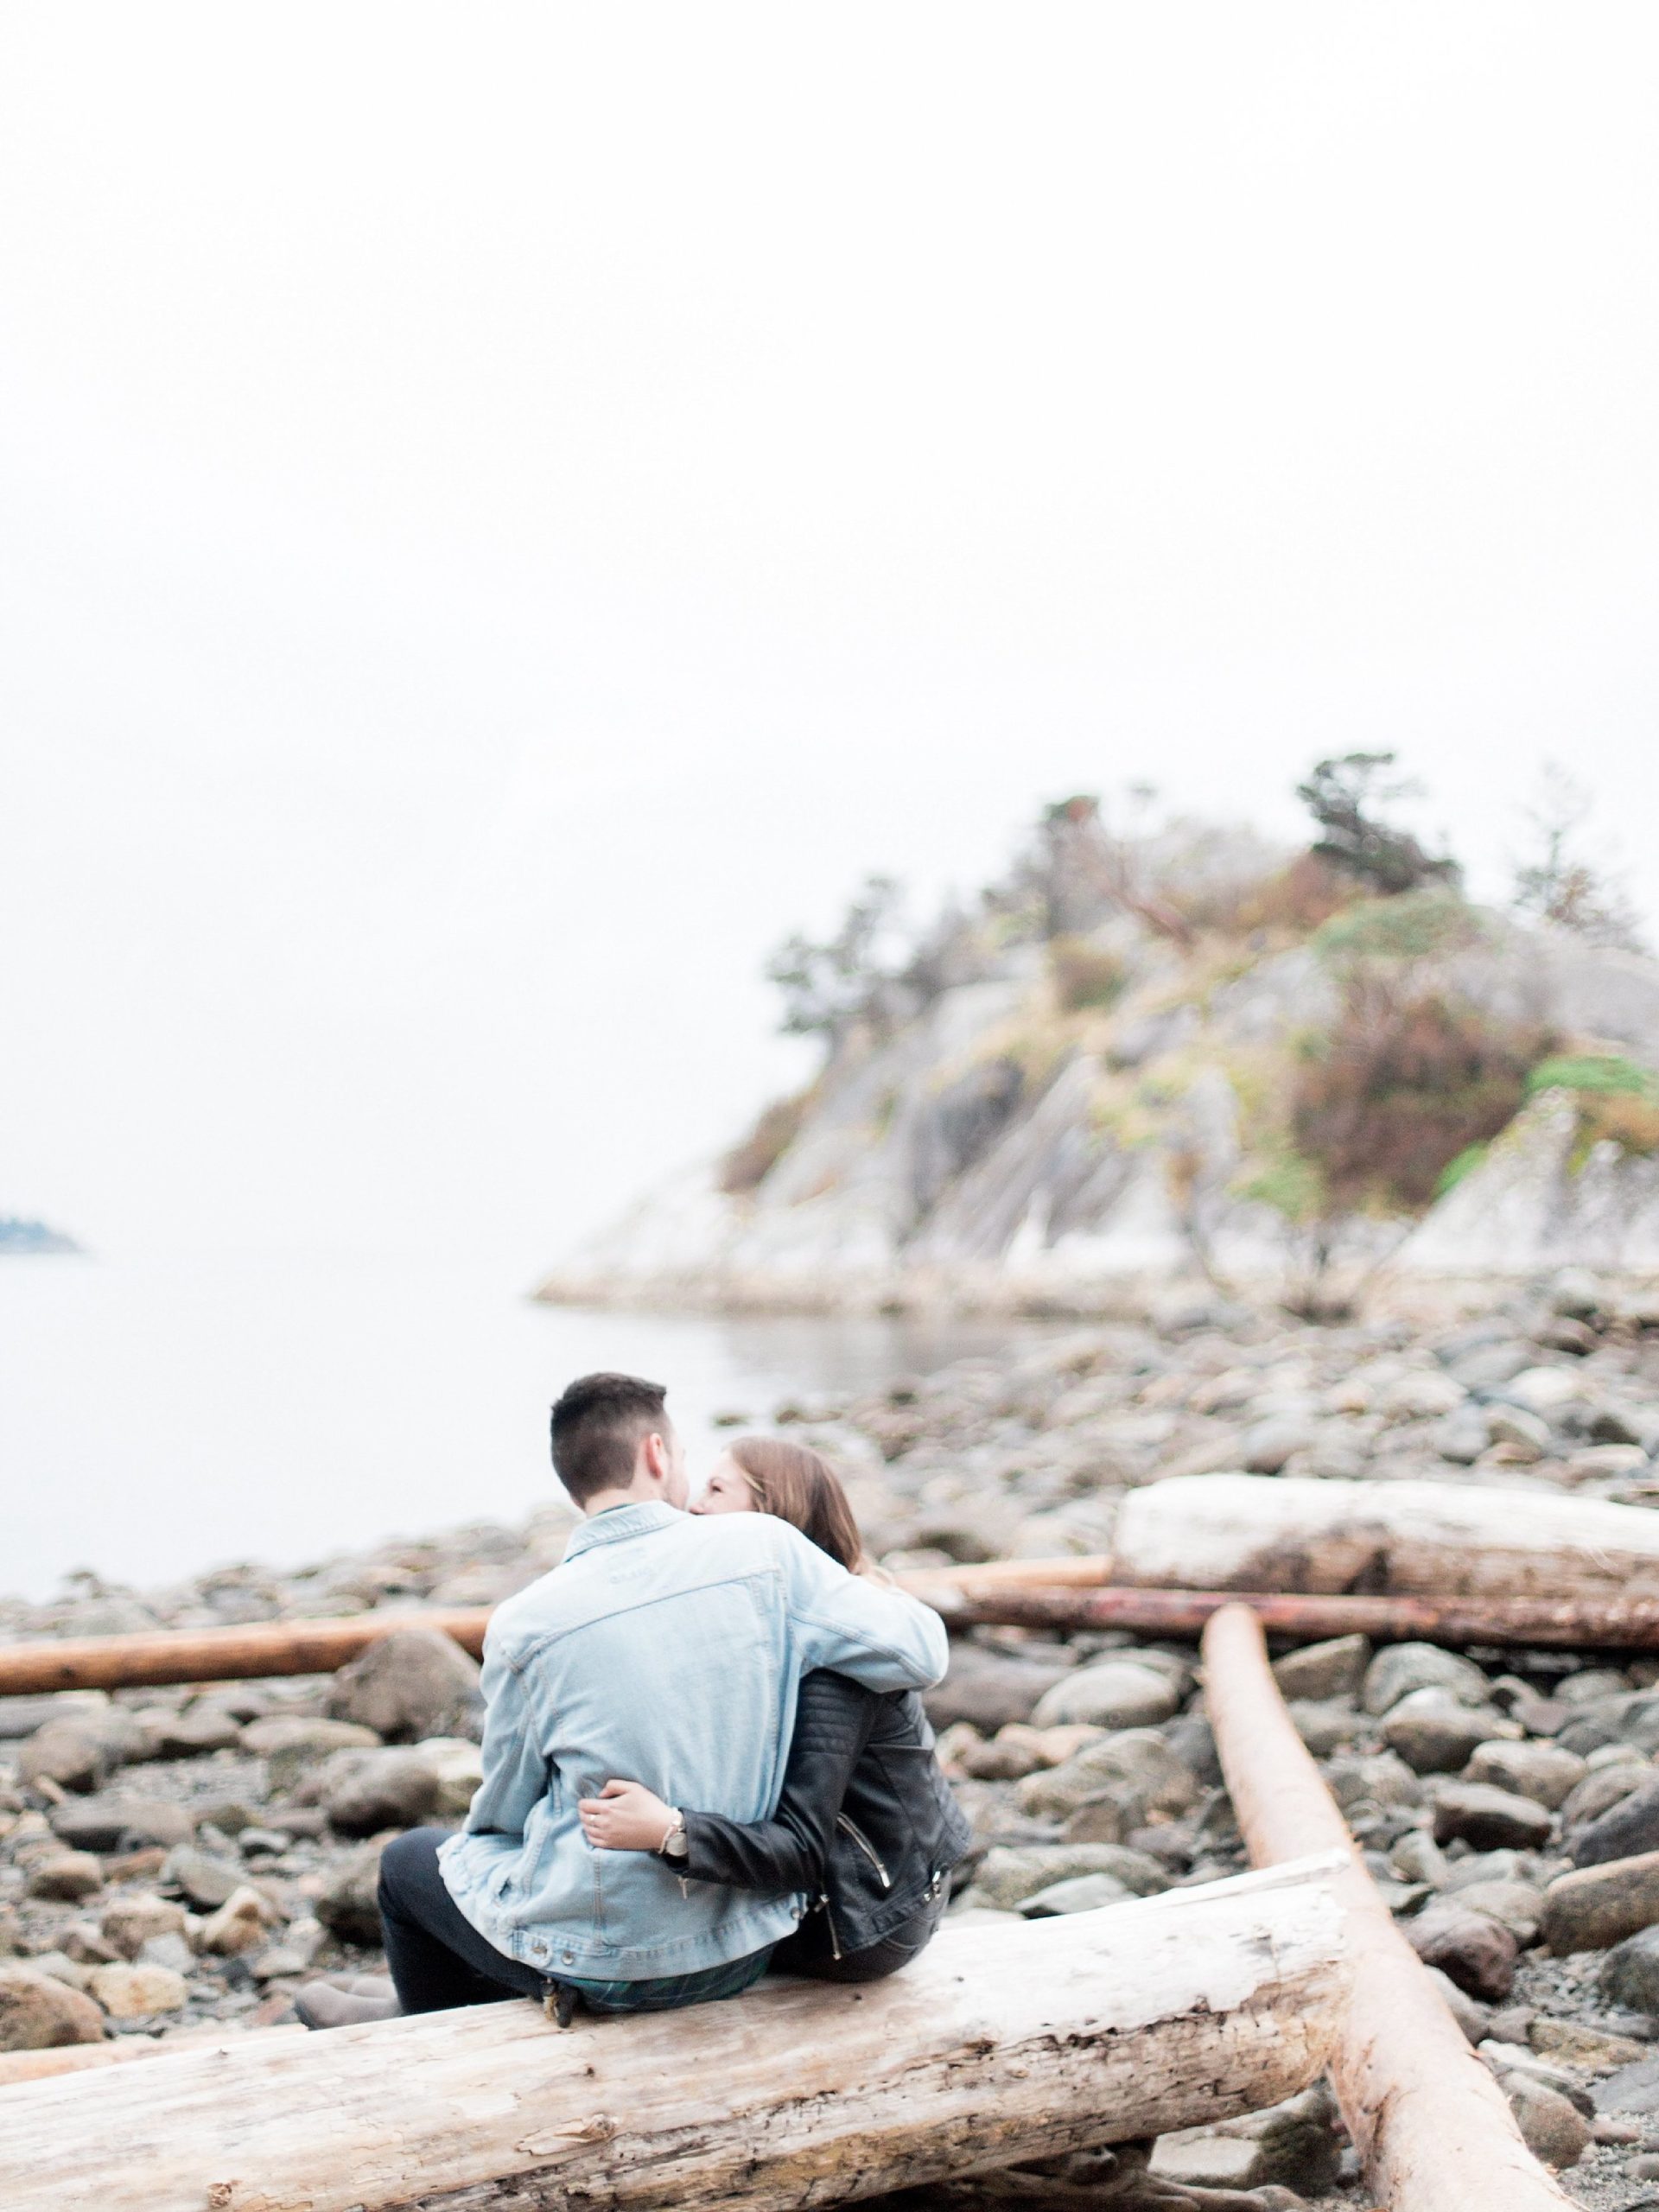 Whytecliff Park Engagement Session, Vancouver Engagement Session, Couples Session Idea, Engagement Session Ideas, Keila Marie Photography